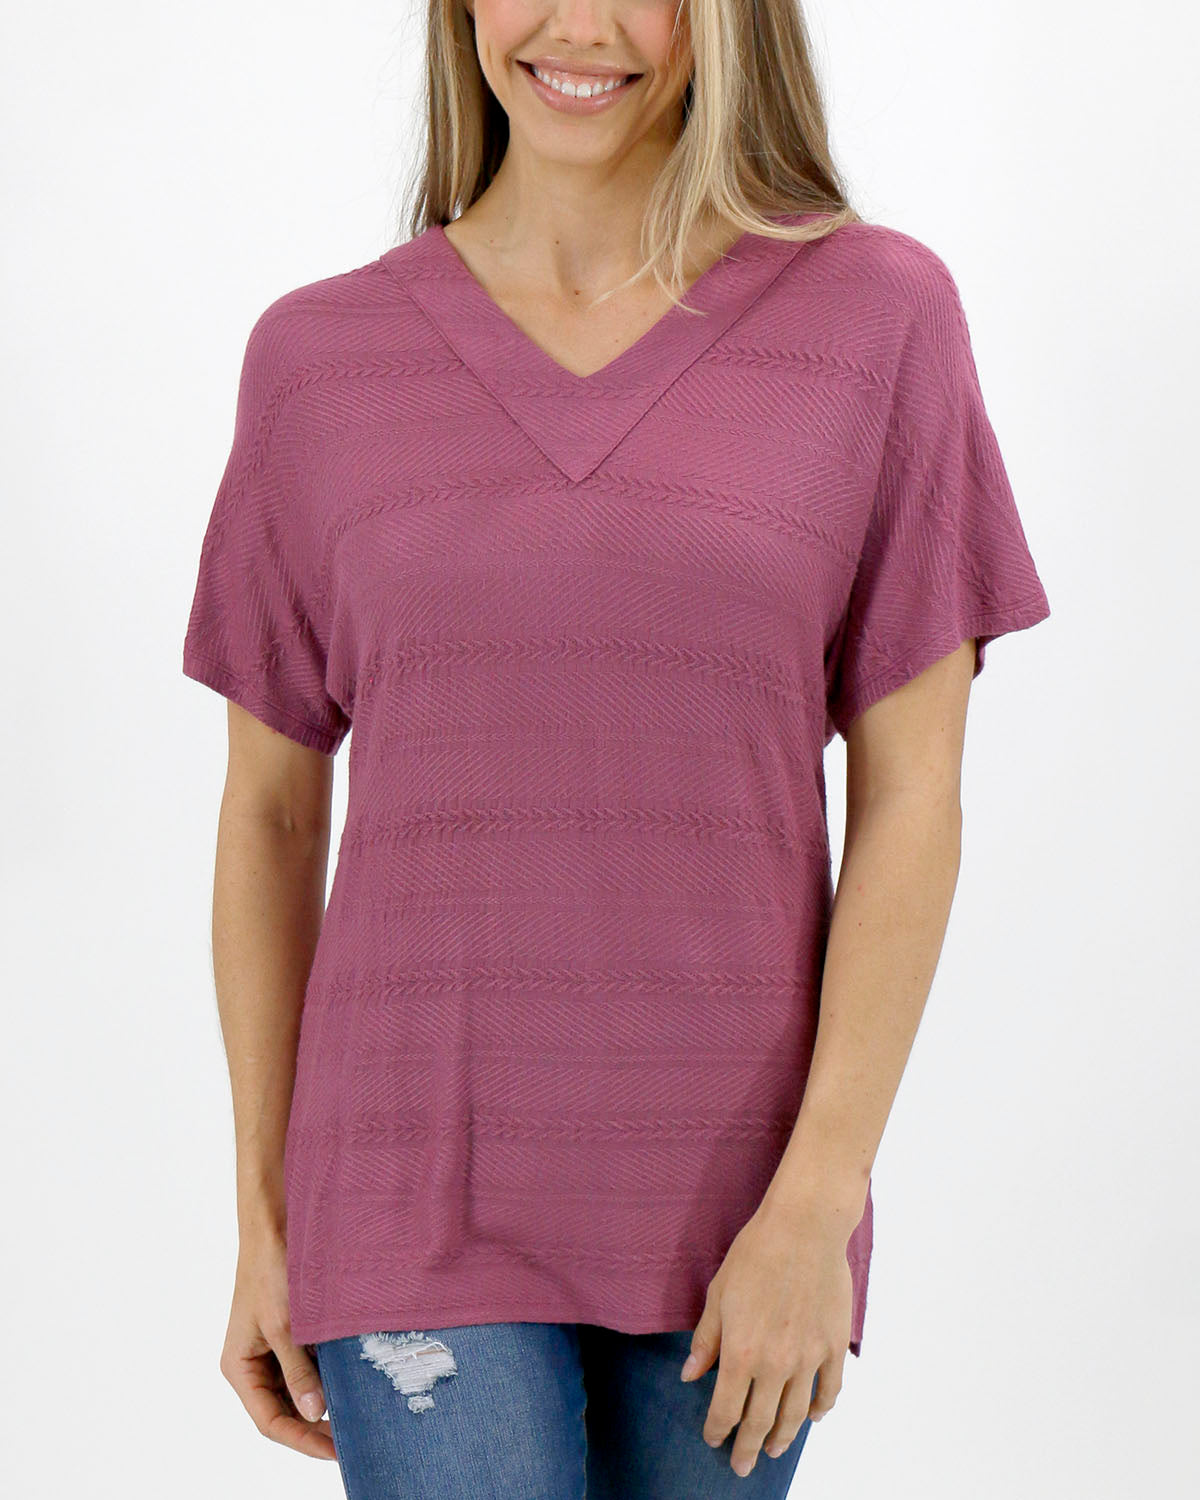 Free Day Textured Dolman Tee in Wild Berry - FINAL SALE